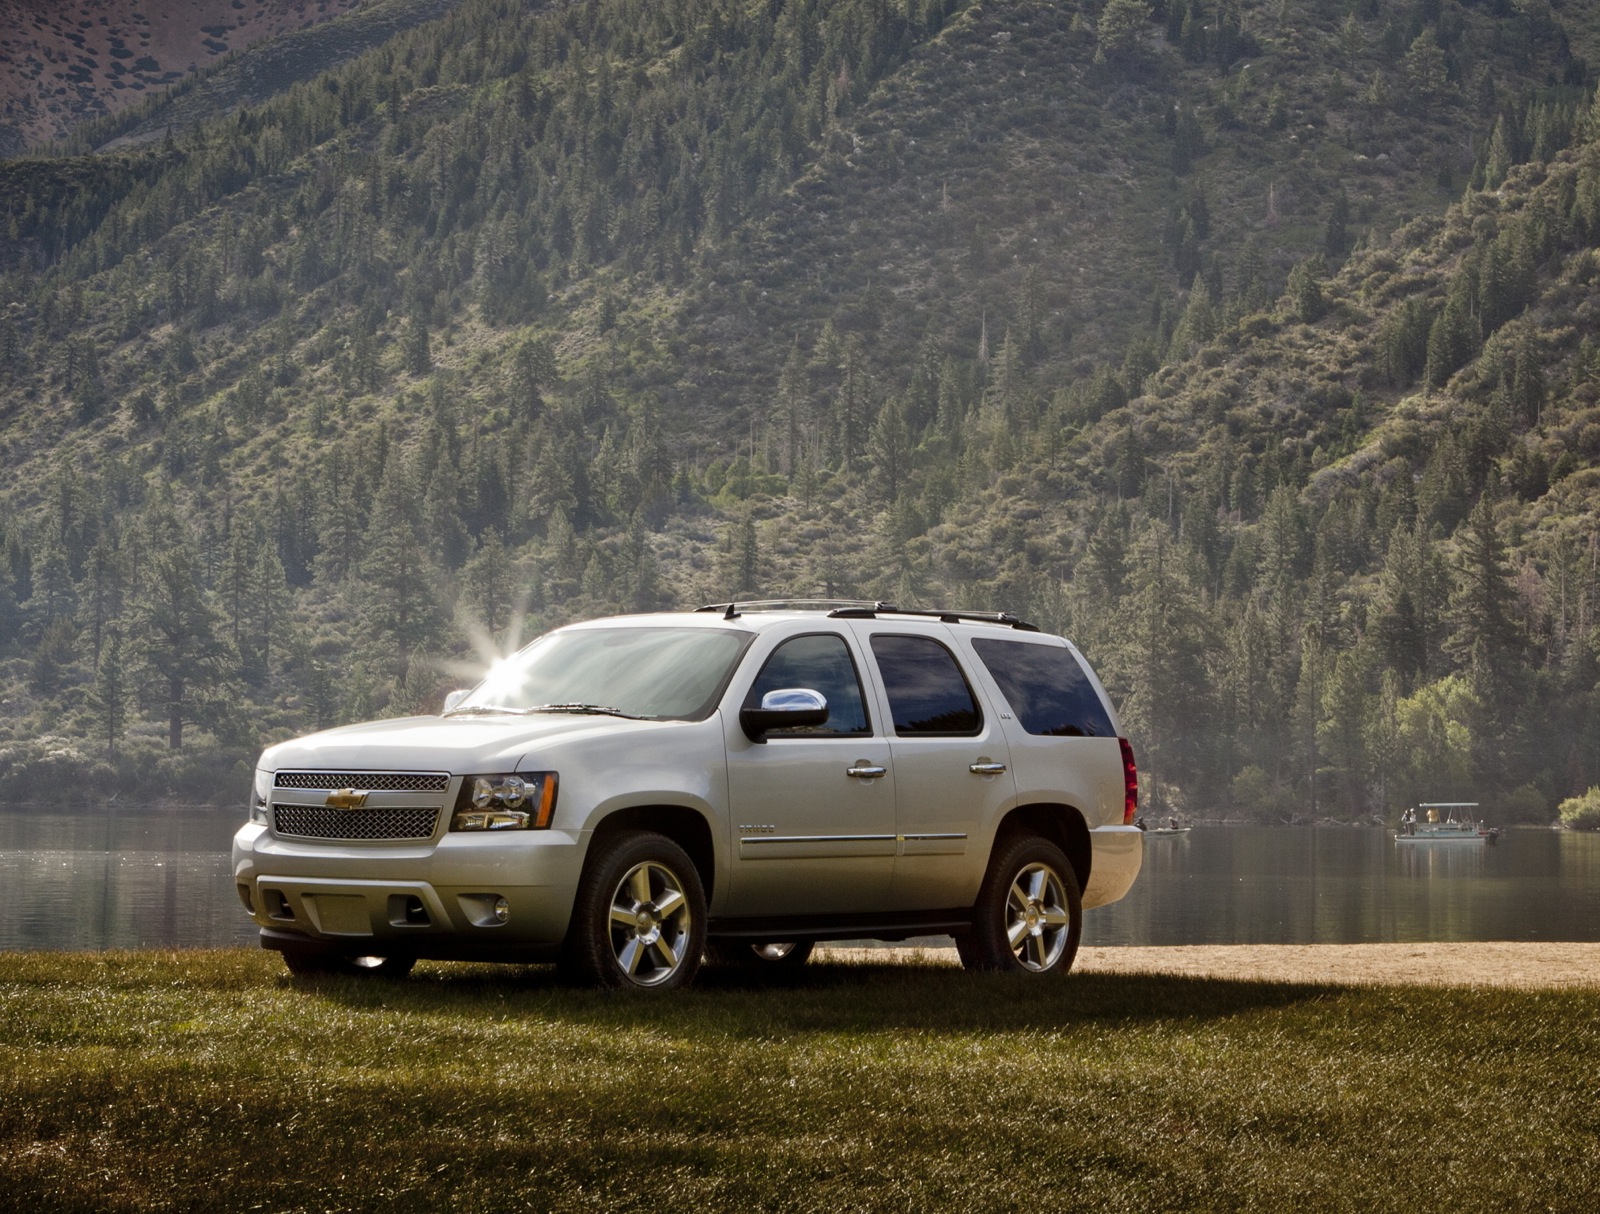 2017 Chevrolet Tahoe Chevy Review Ratings Specs S And Photos The Car Connection